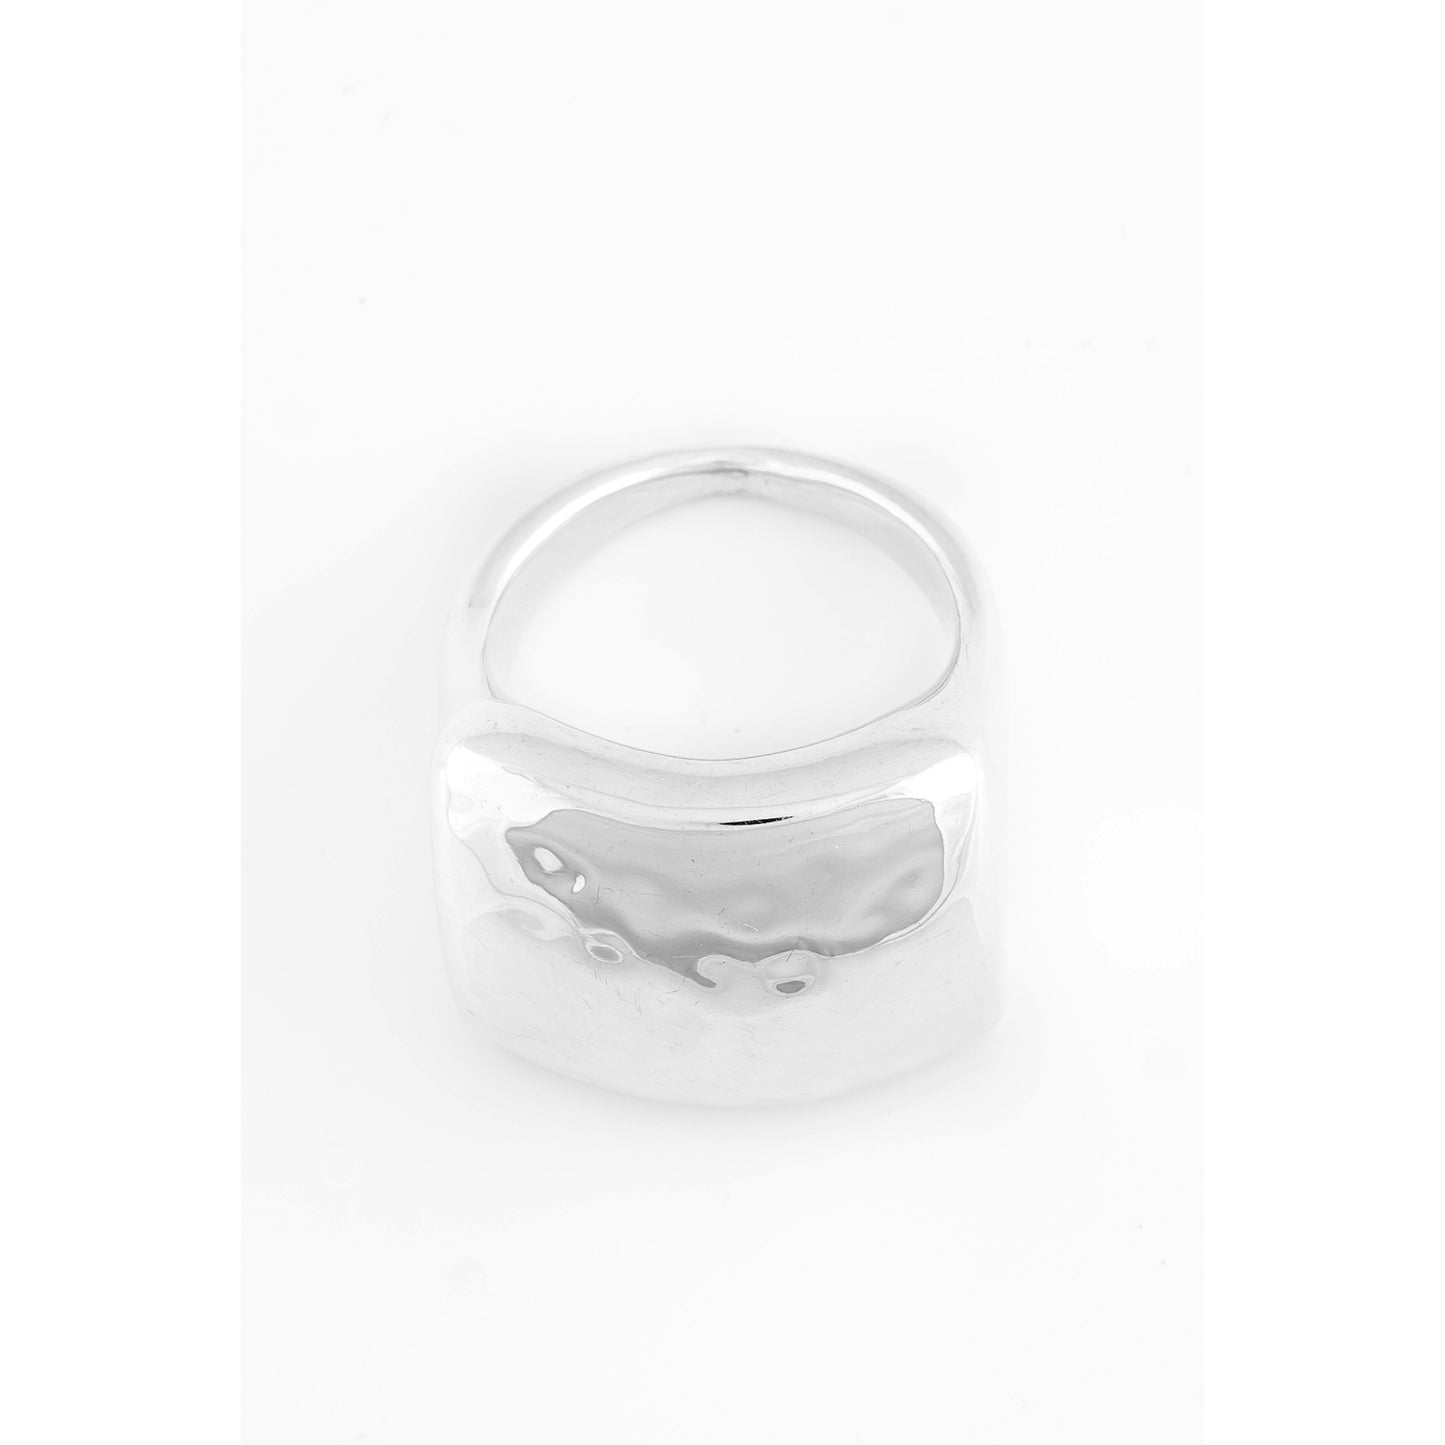 Silver ring on white background.